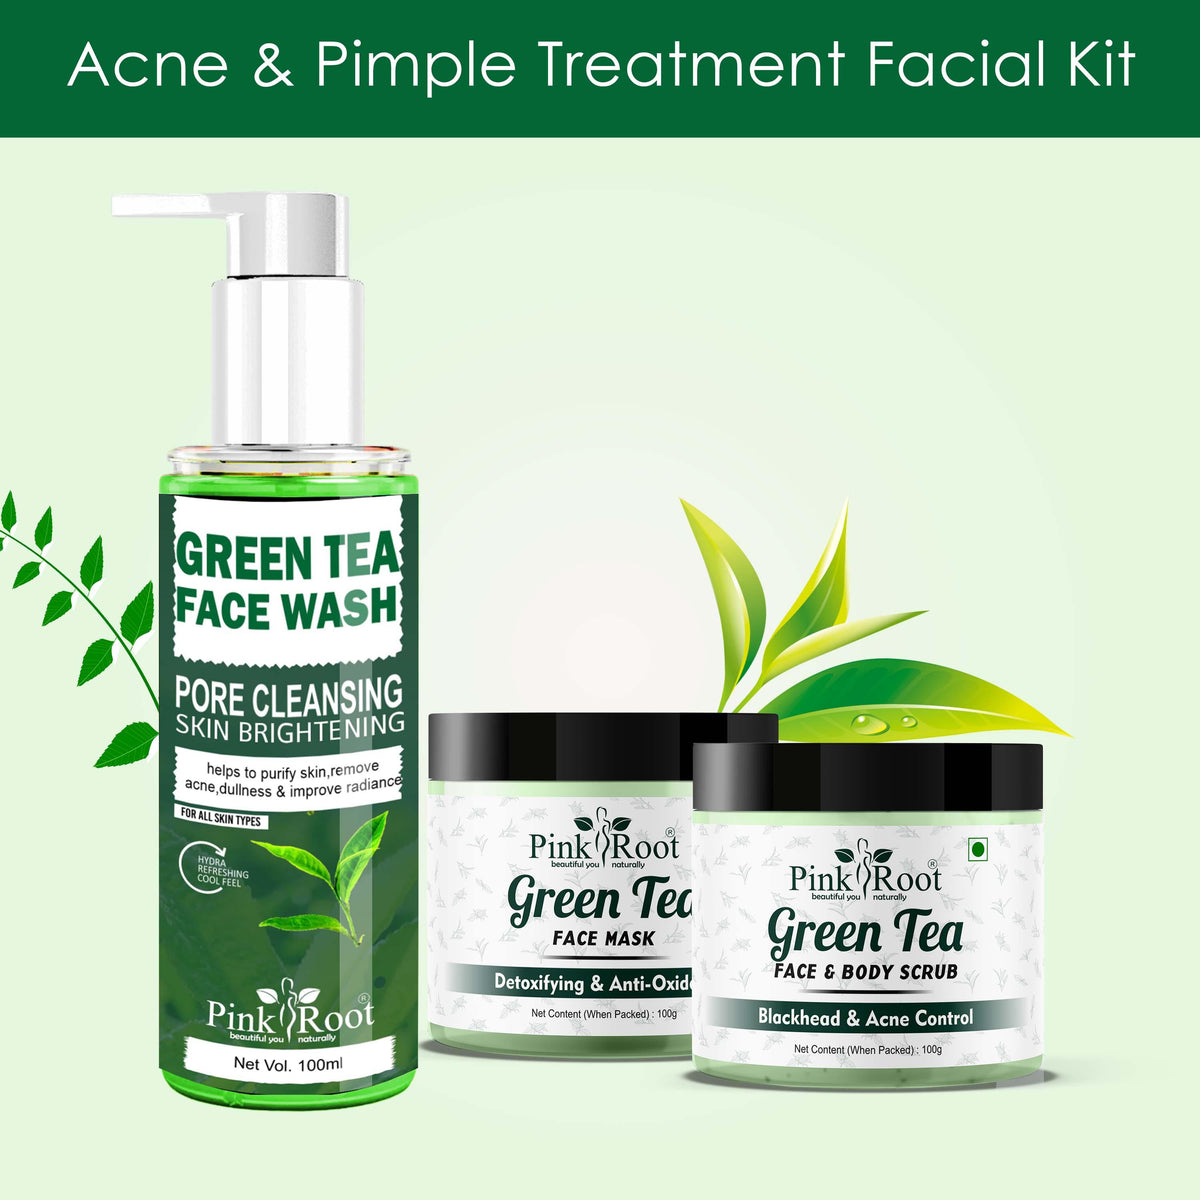 Pink Root Green Tea Acne & Pimple Facial Kit helps in removing acnes, pimples, controls excess oil on skin and gives flawless skin - Pink Root